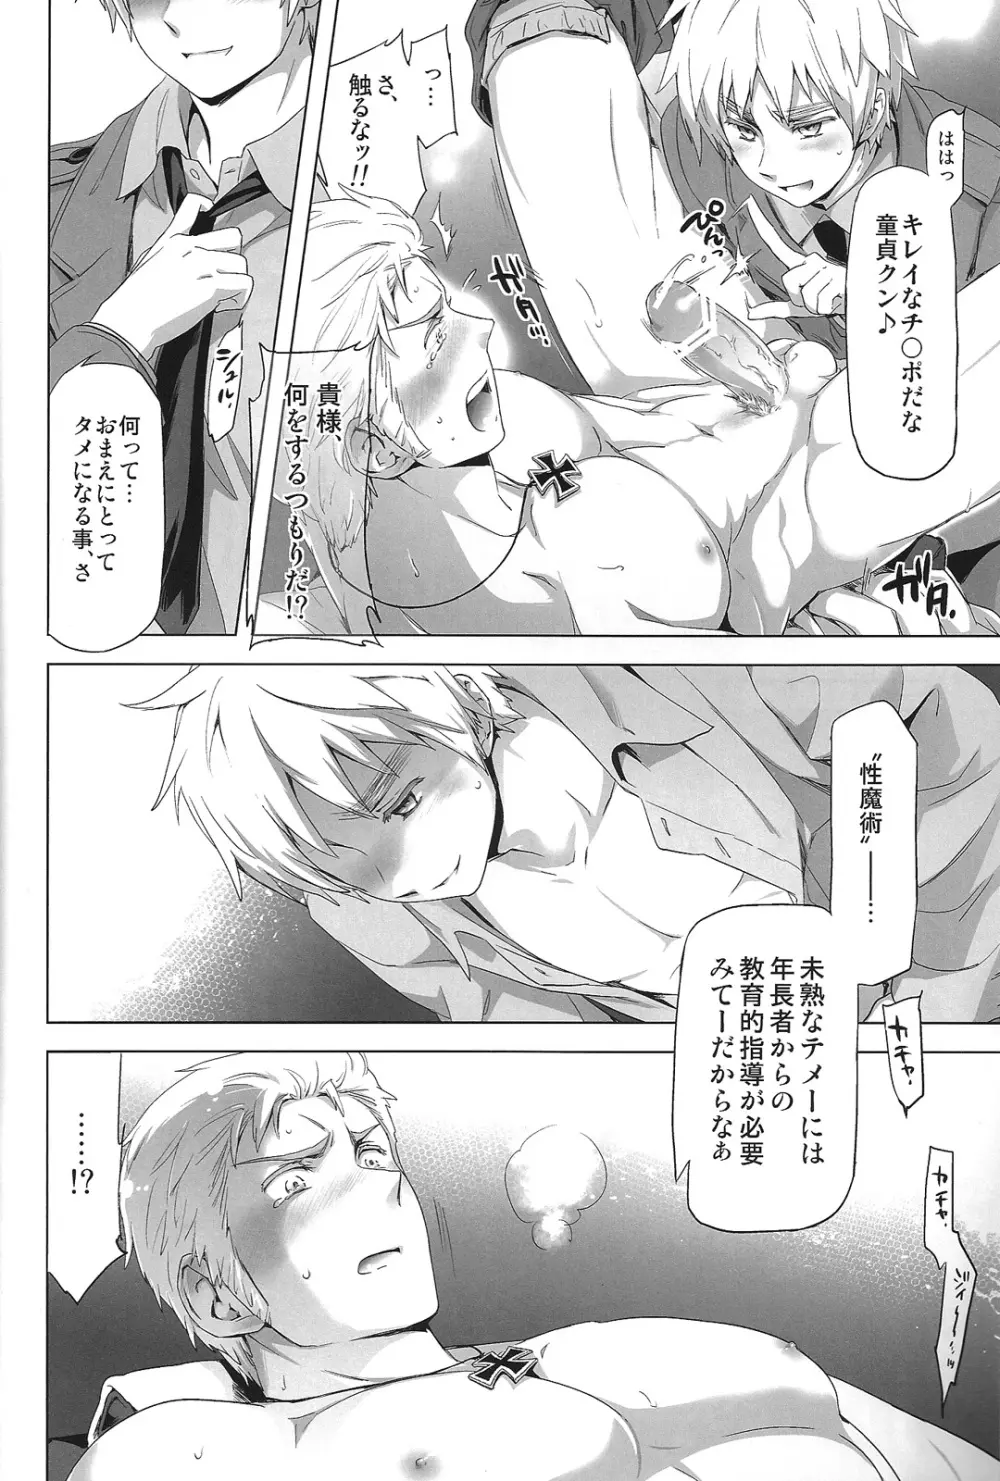 Magia Sexualis 1 Page.27